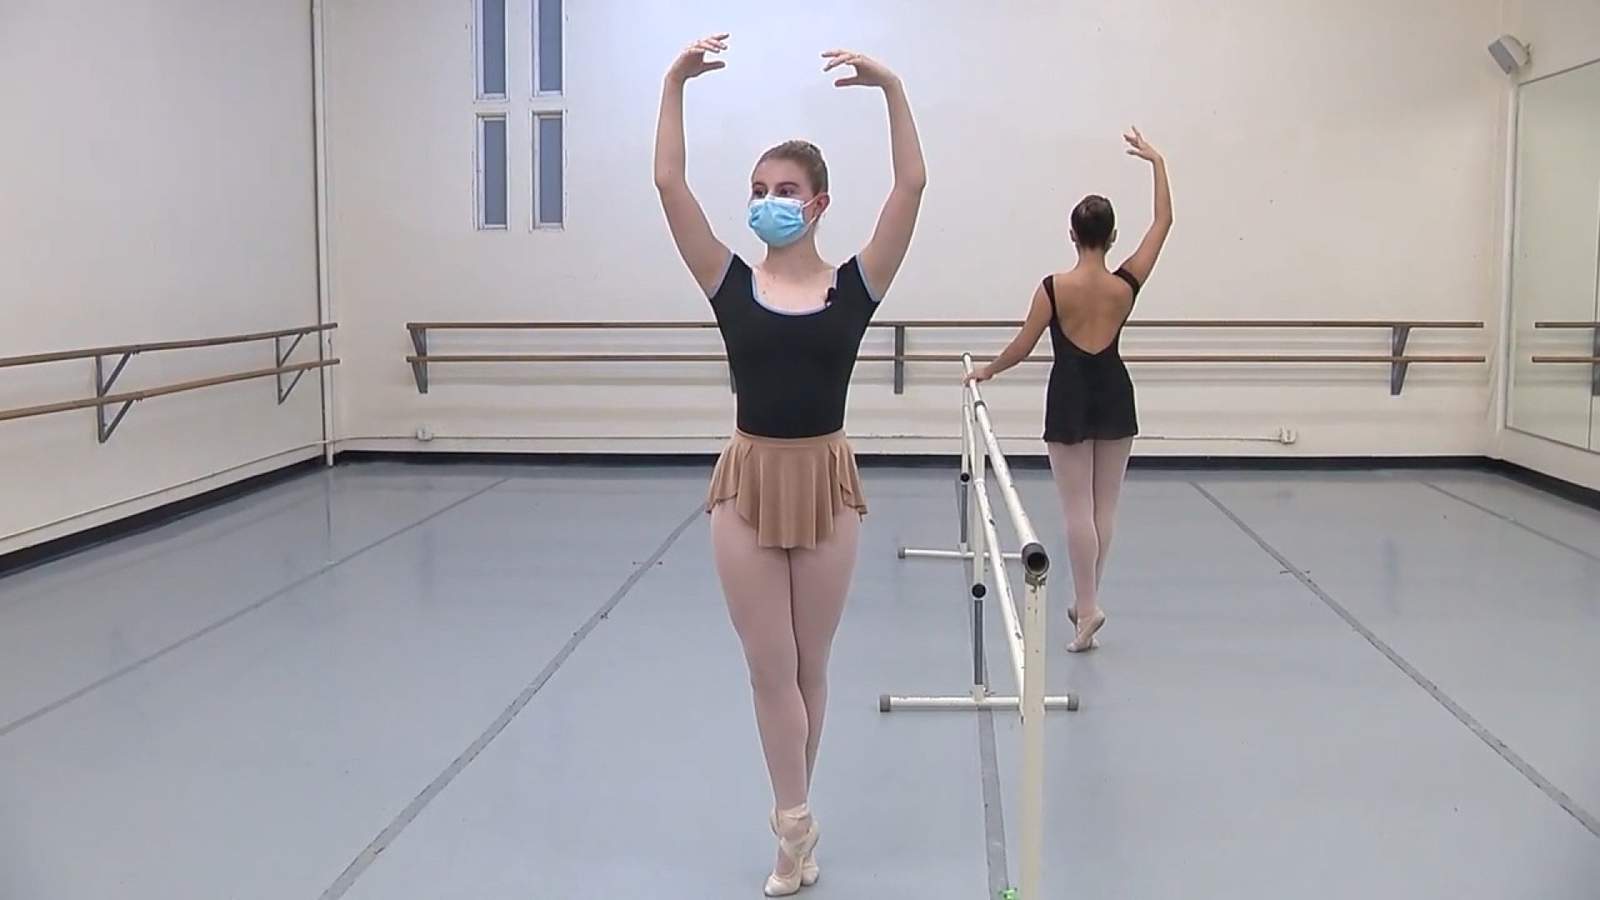 The Ballet Conservatory of South Texas spreads holiday cheer